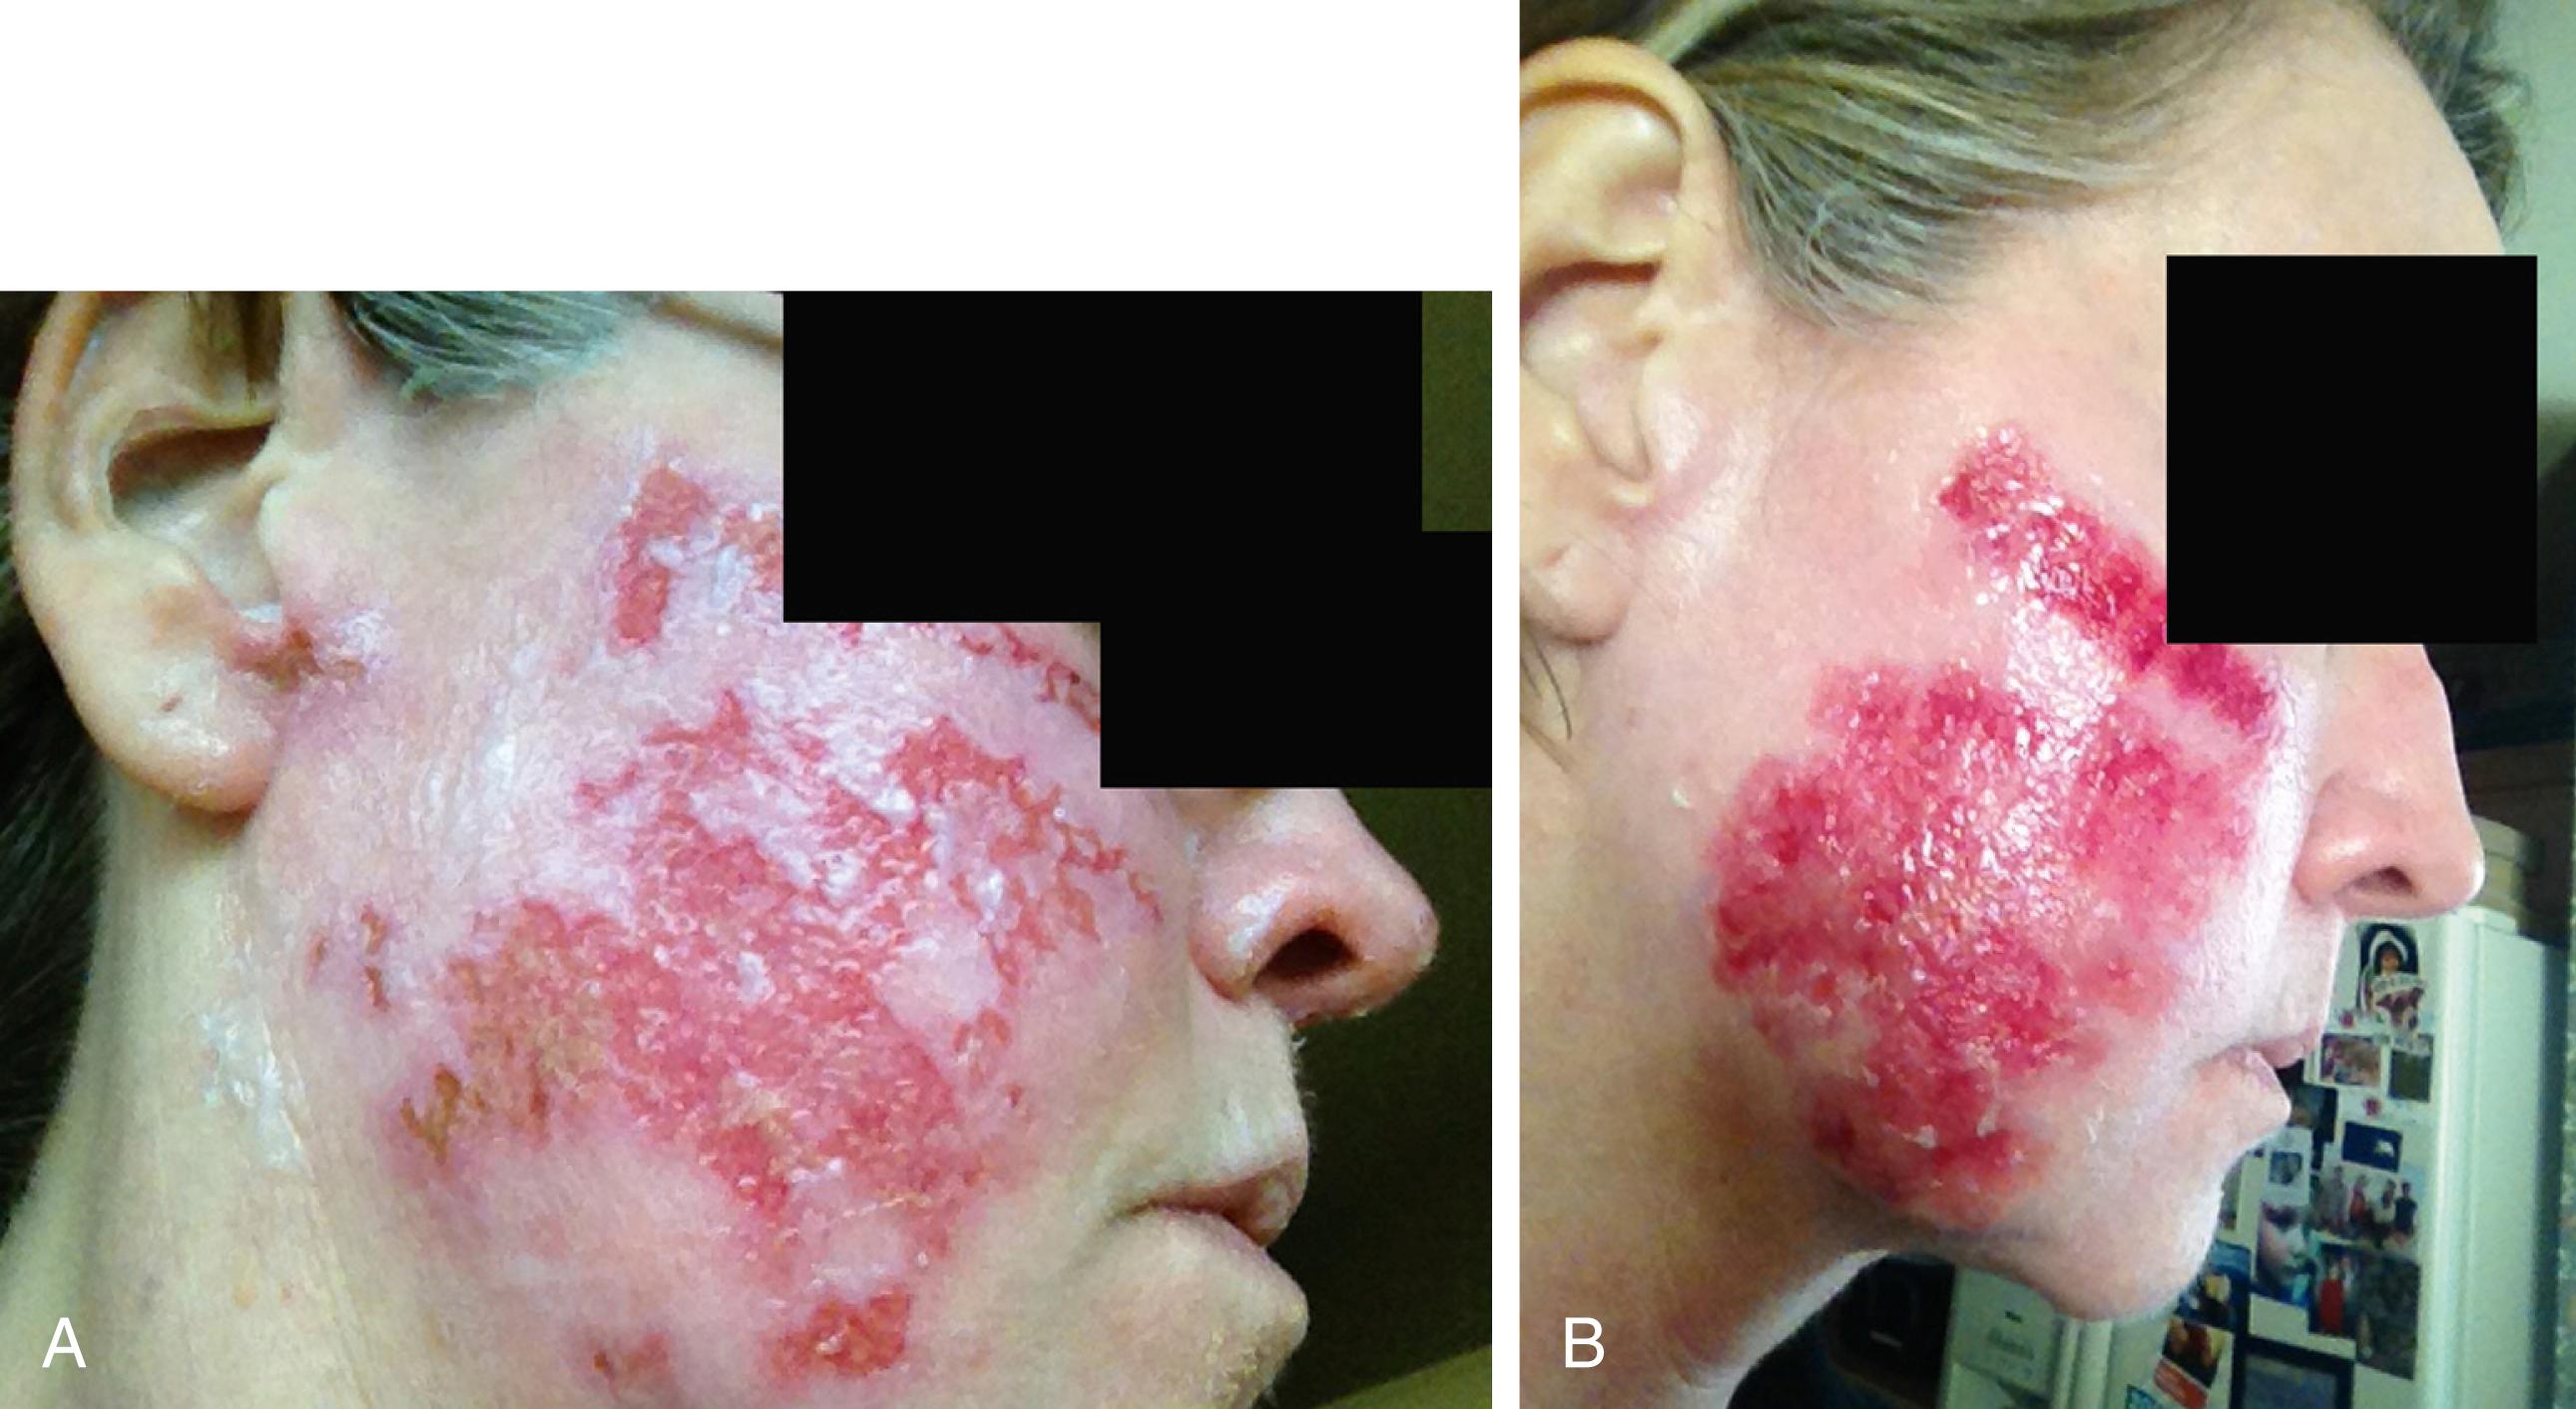 Fig. 16.4, Disseminated viral infection (herpes simplex virus or varicella zoster virus) can manifest aggressively as quickly spreading erosions and ulcerations with a high likelihood to scar if early intervention is missed. A, Patient at postoperative day 5 from a trichloroacetic acid blue peel of the face and a Hetter VL peel of the eyes. B, Same patient several weeks later still with erosions. In between, she developed a secondary S. aureus infection requiring oral antibiotics.